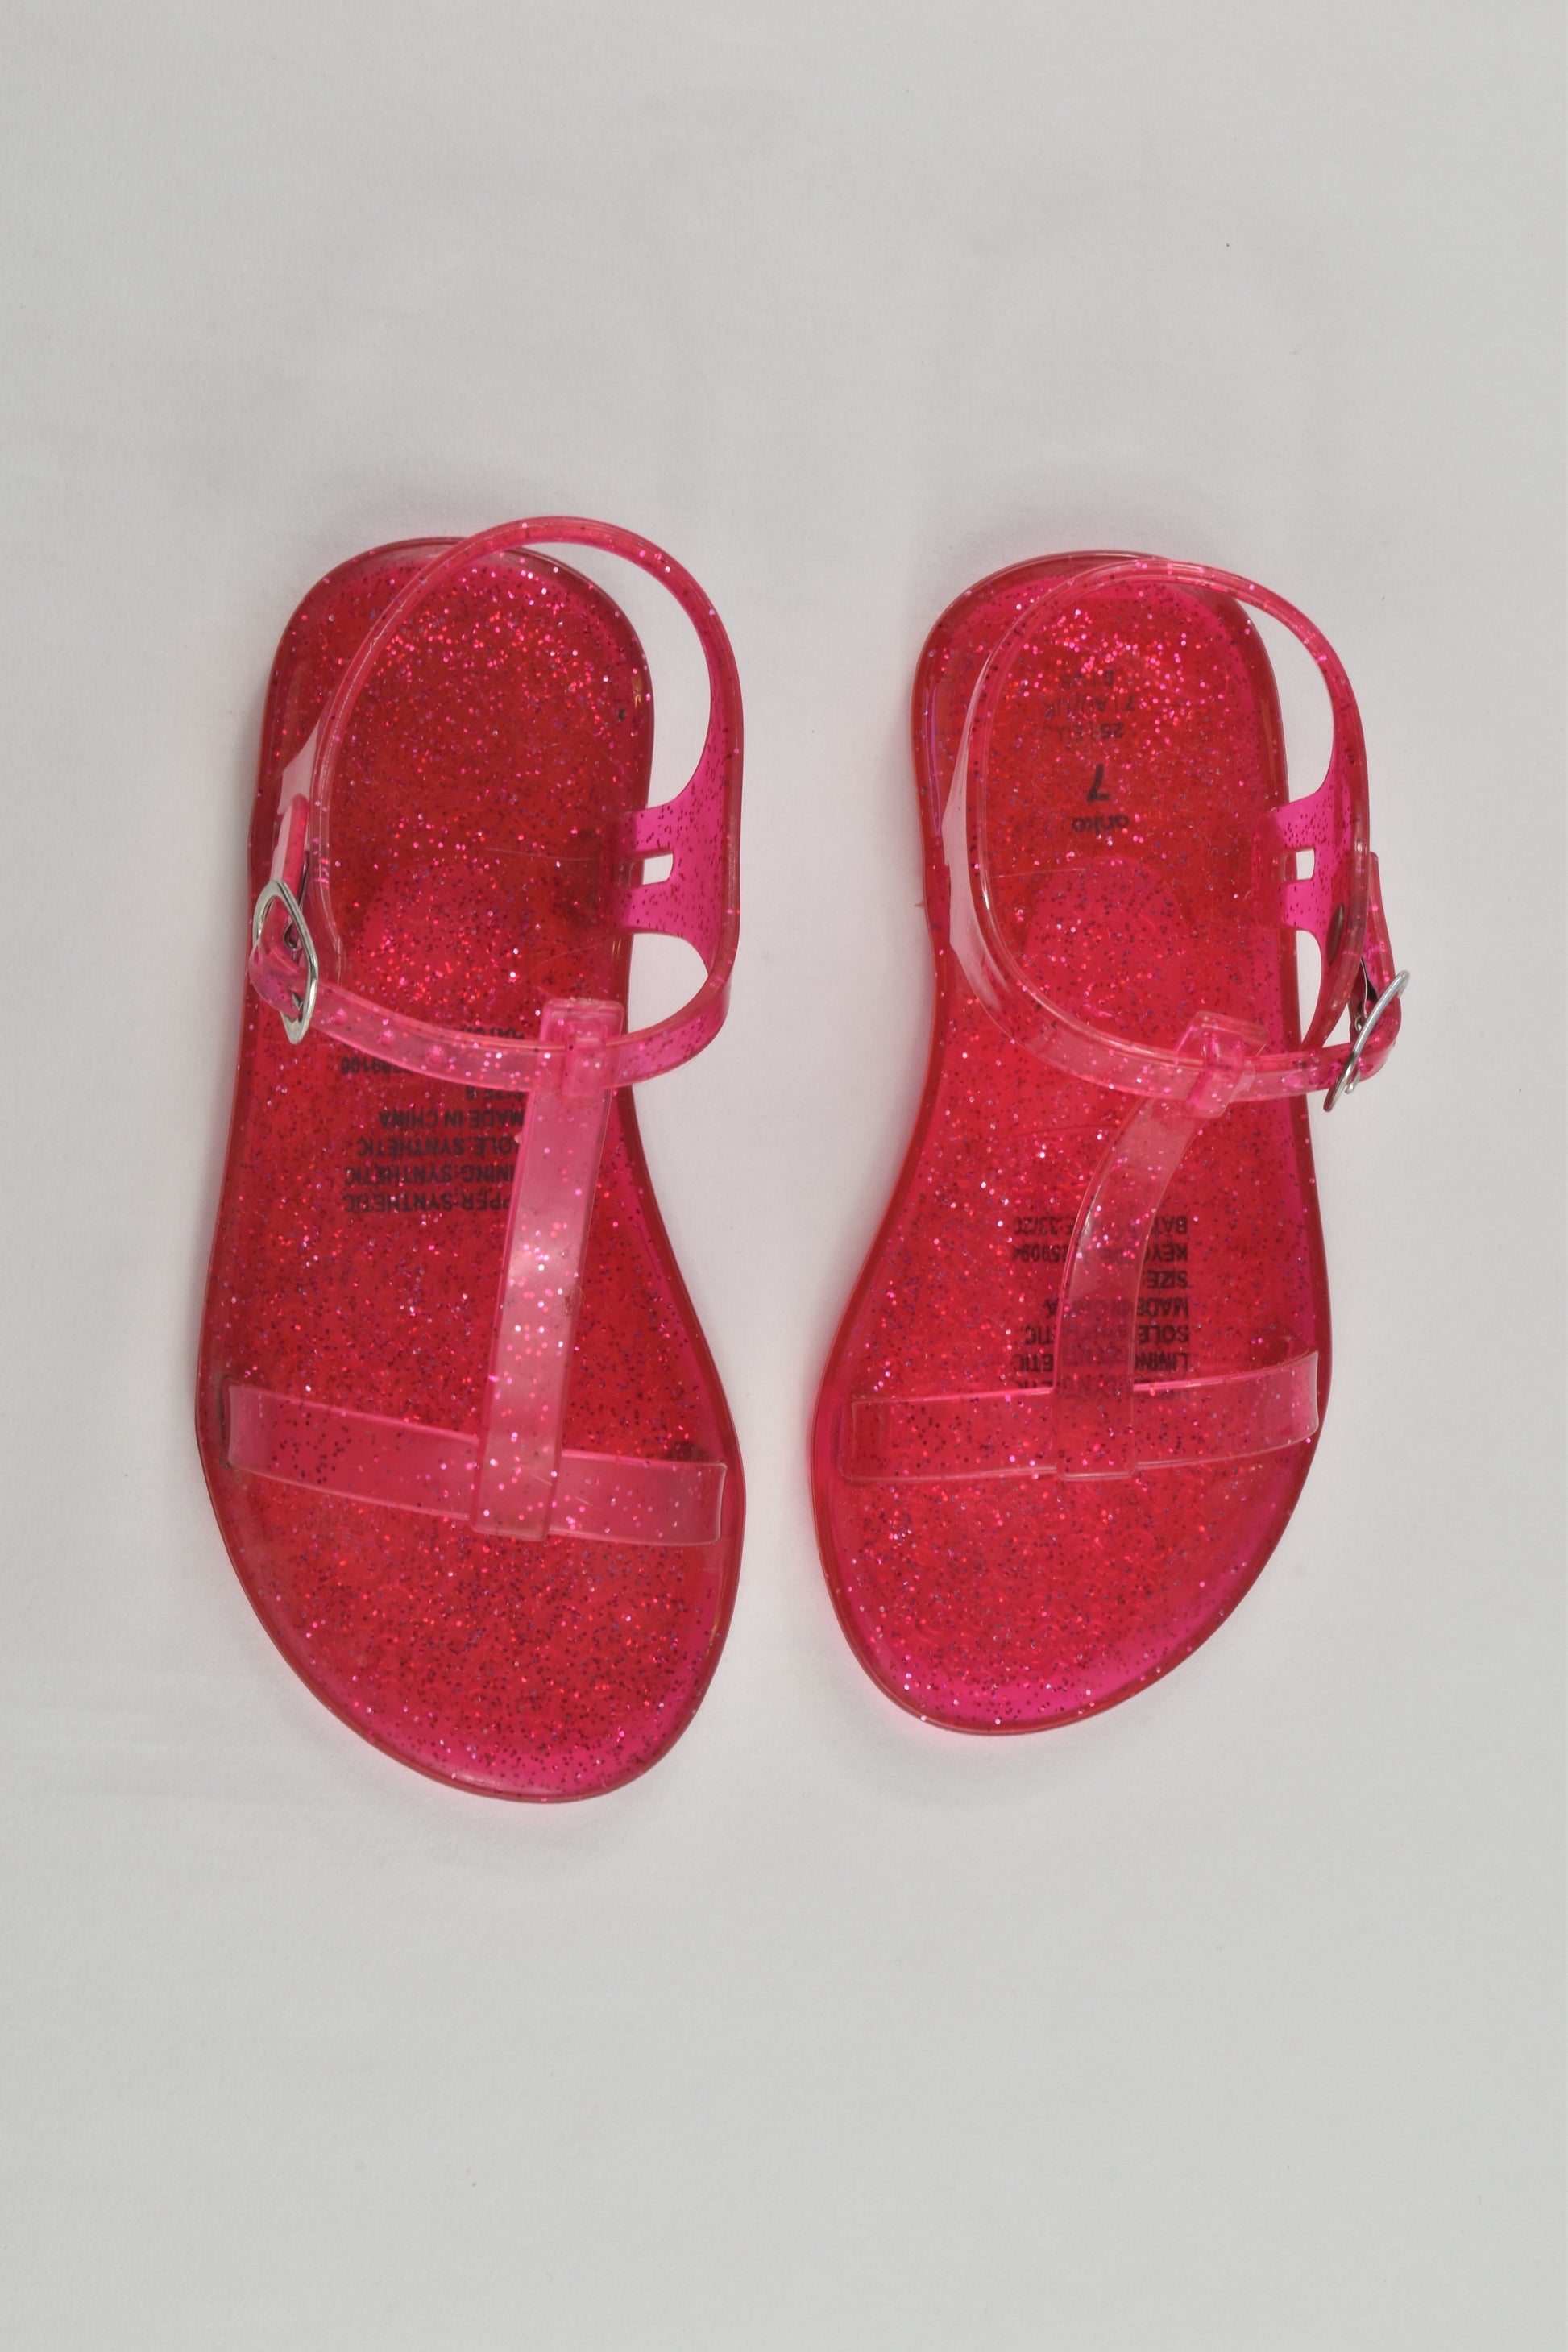 Anko Size 7 Pink Jelly Sandals